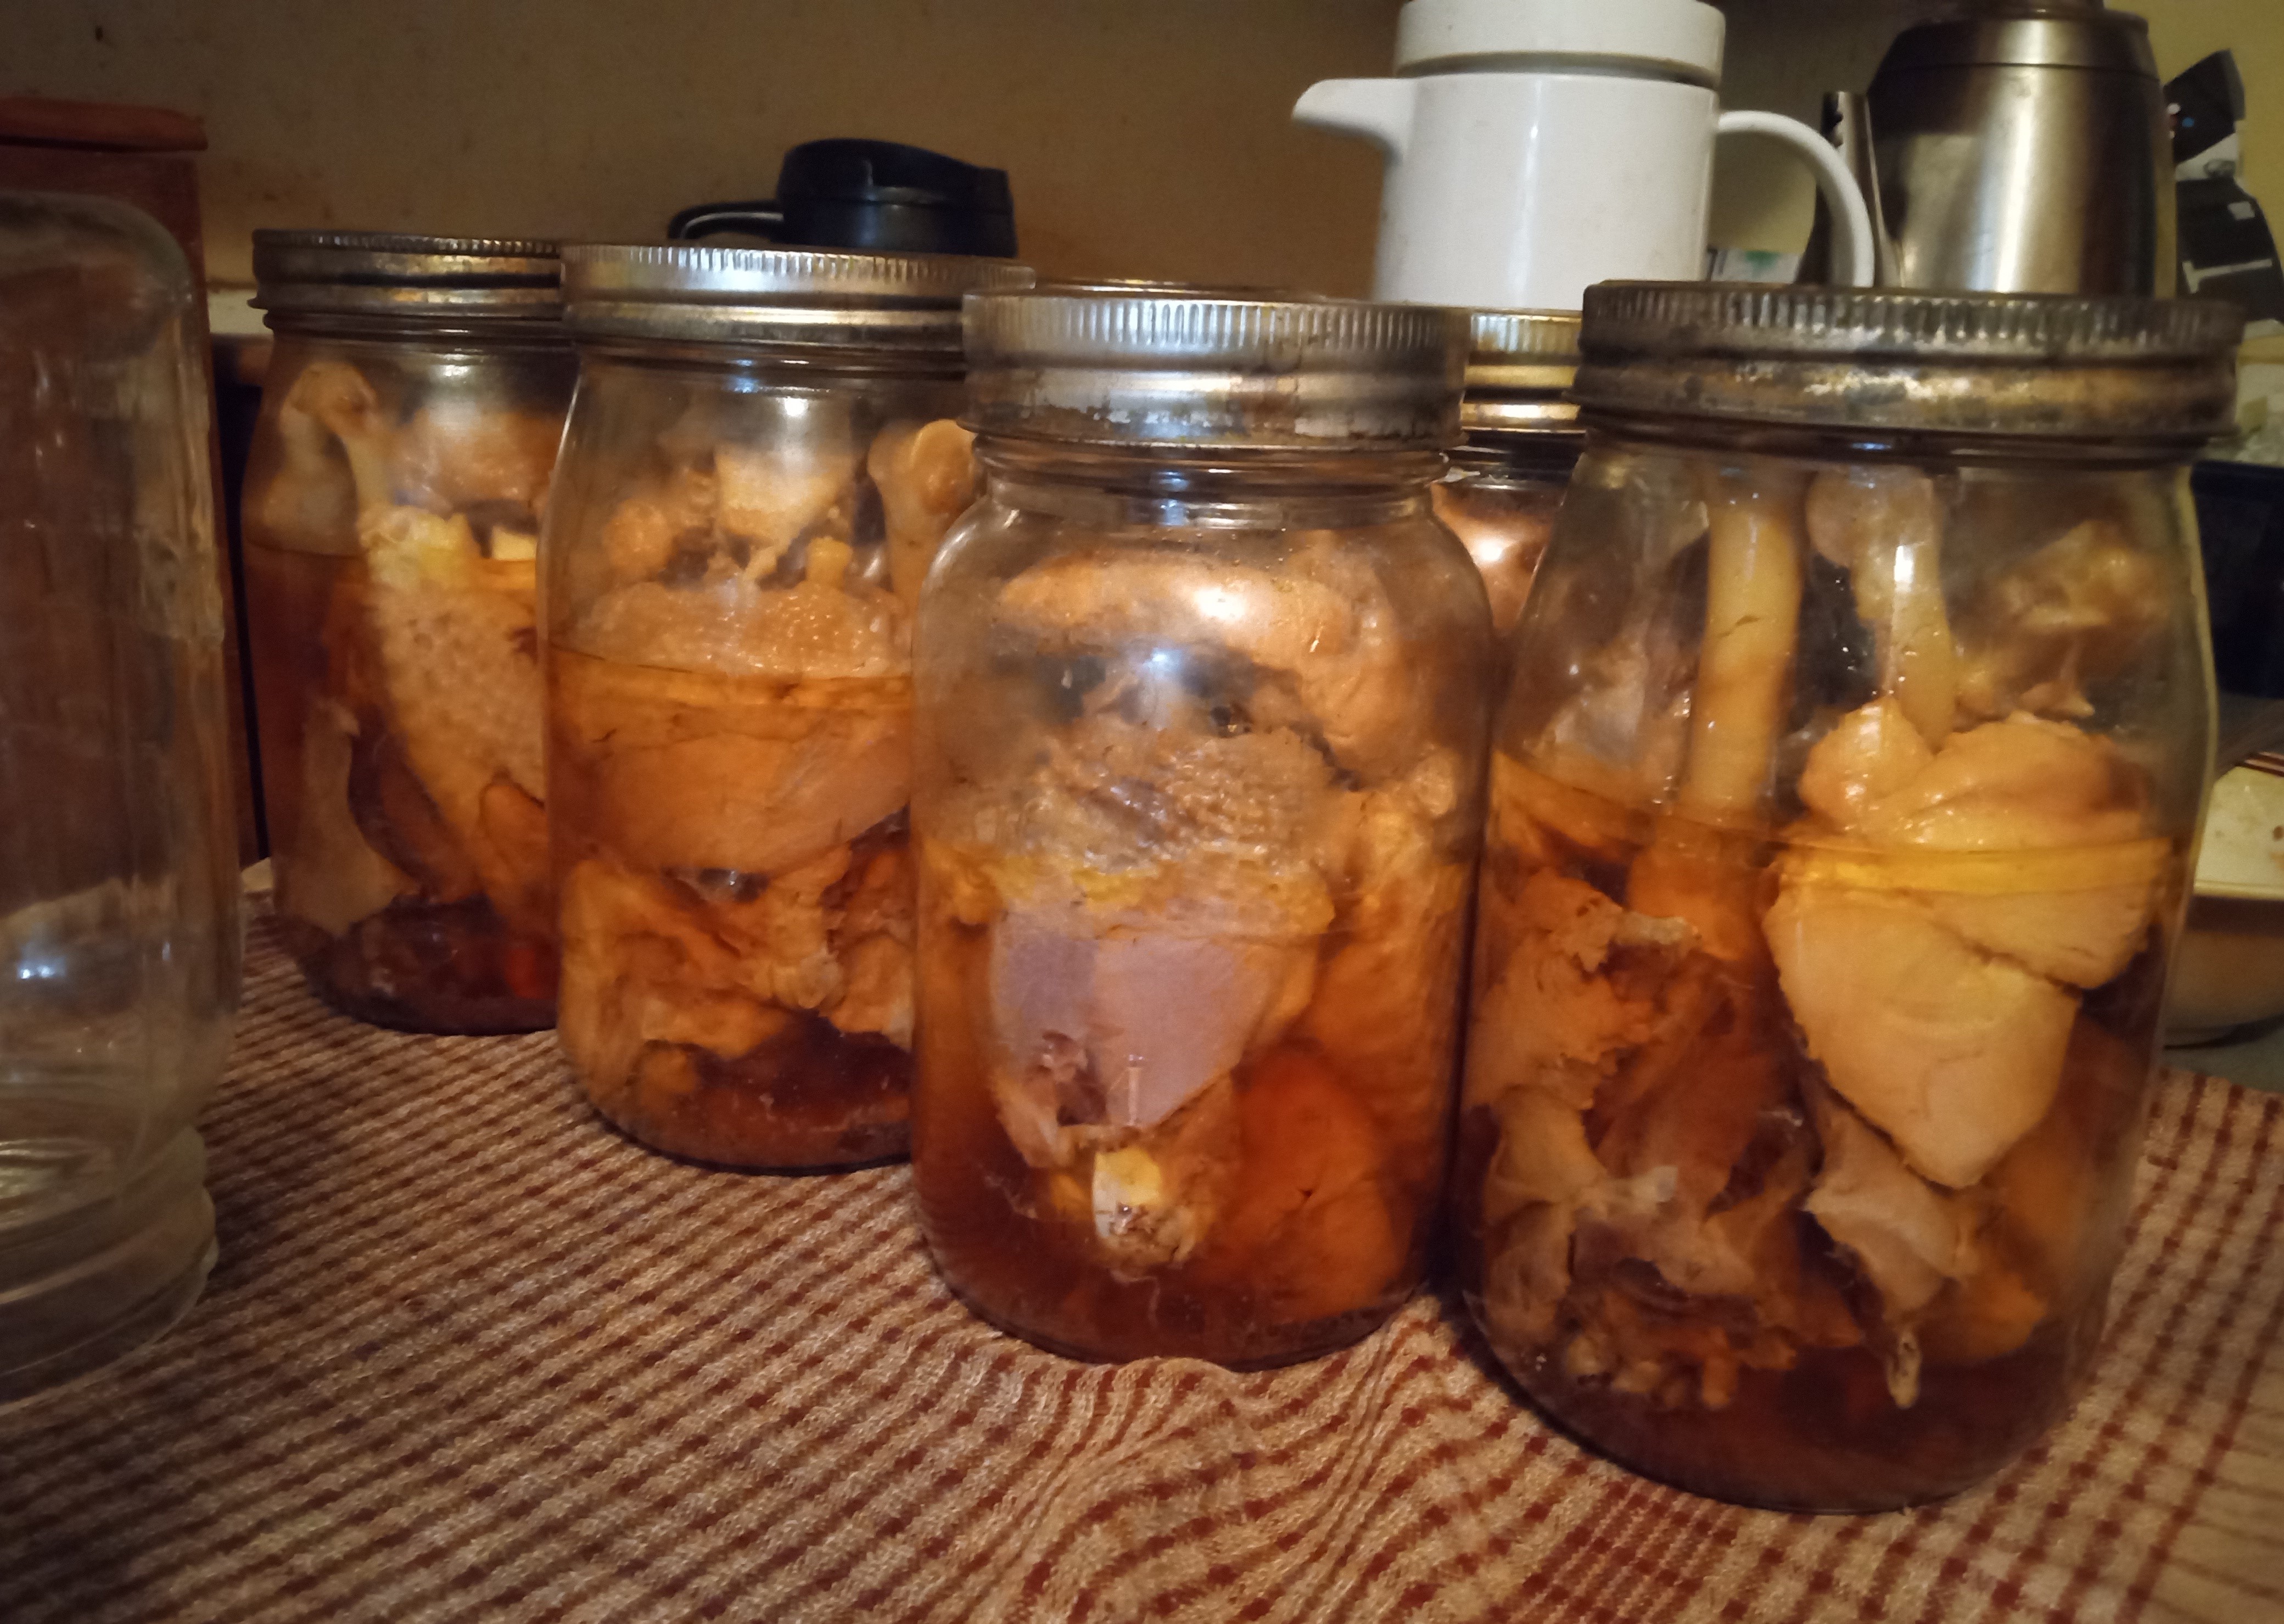 Canning - Preserving by pressure canning